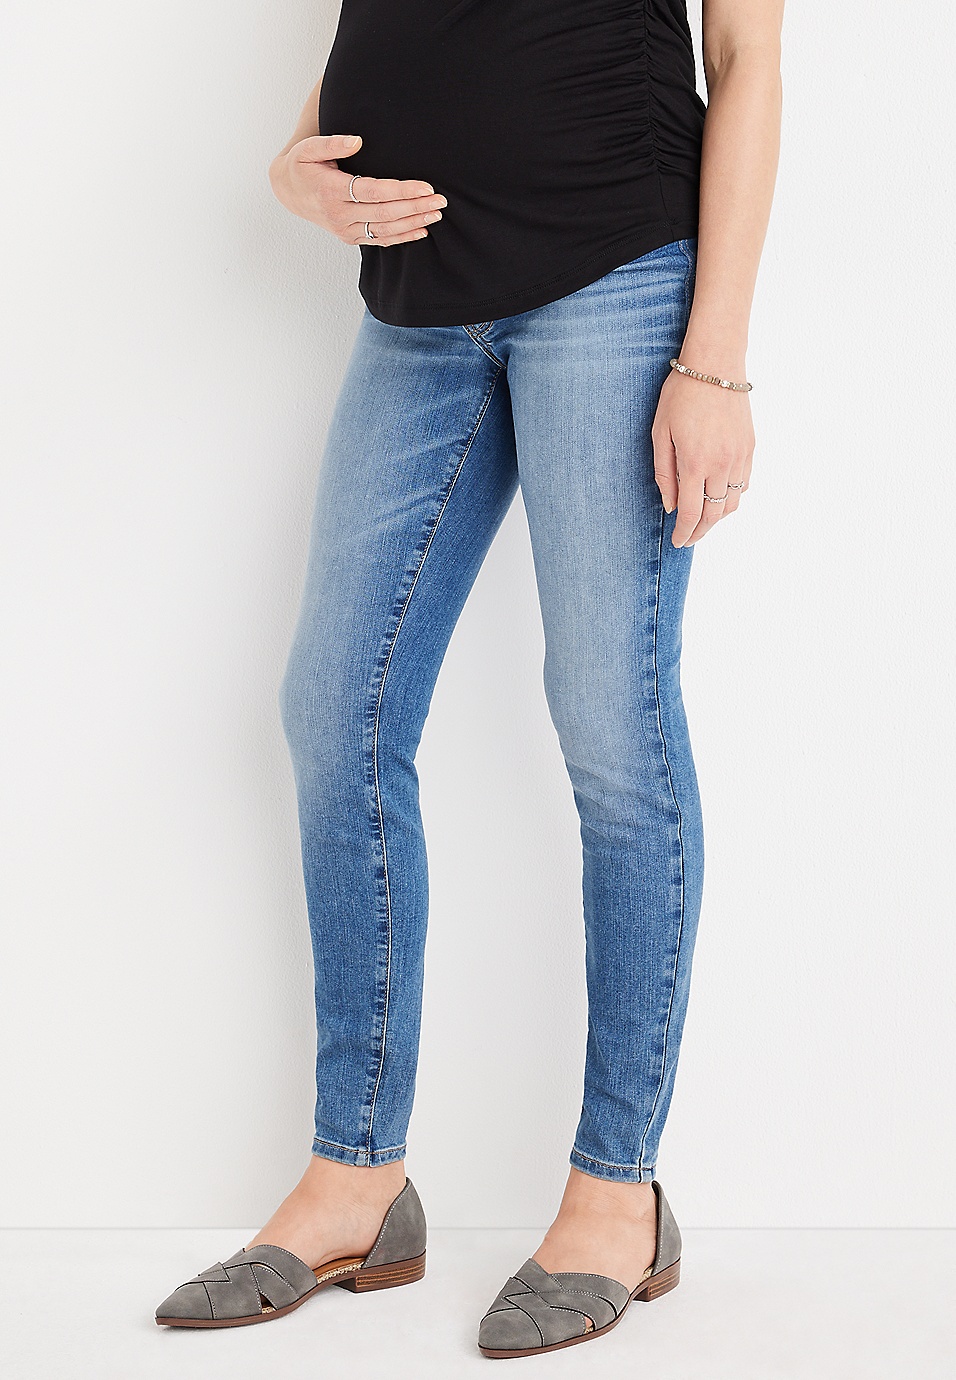 Slim-Fit Stretch Pull-On Jeggings at Cotton Traders